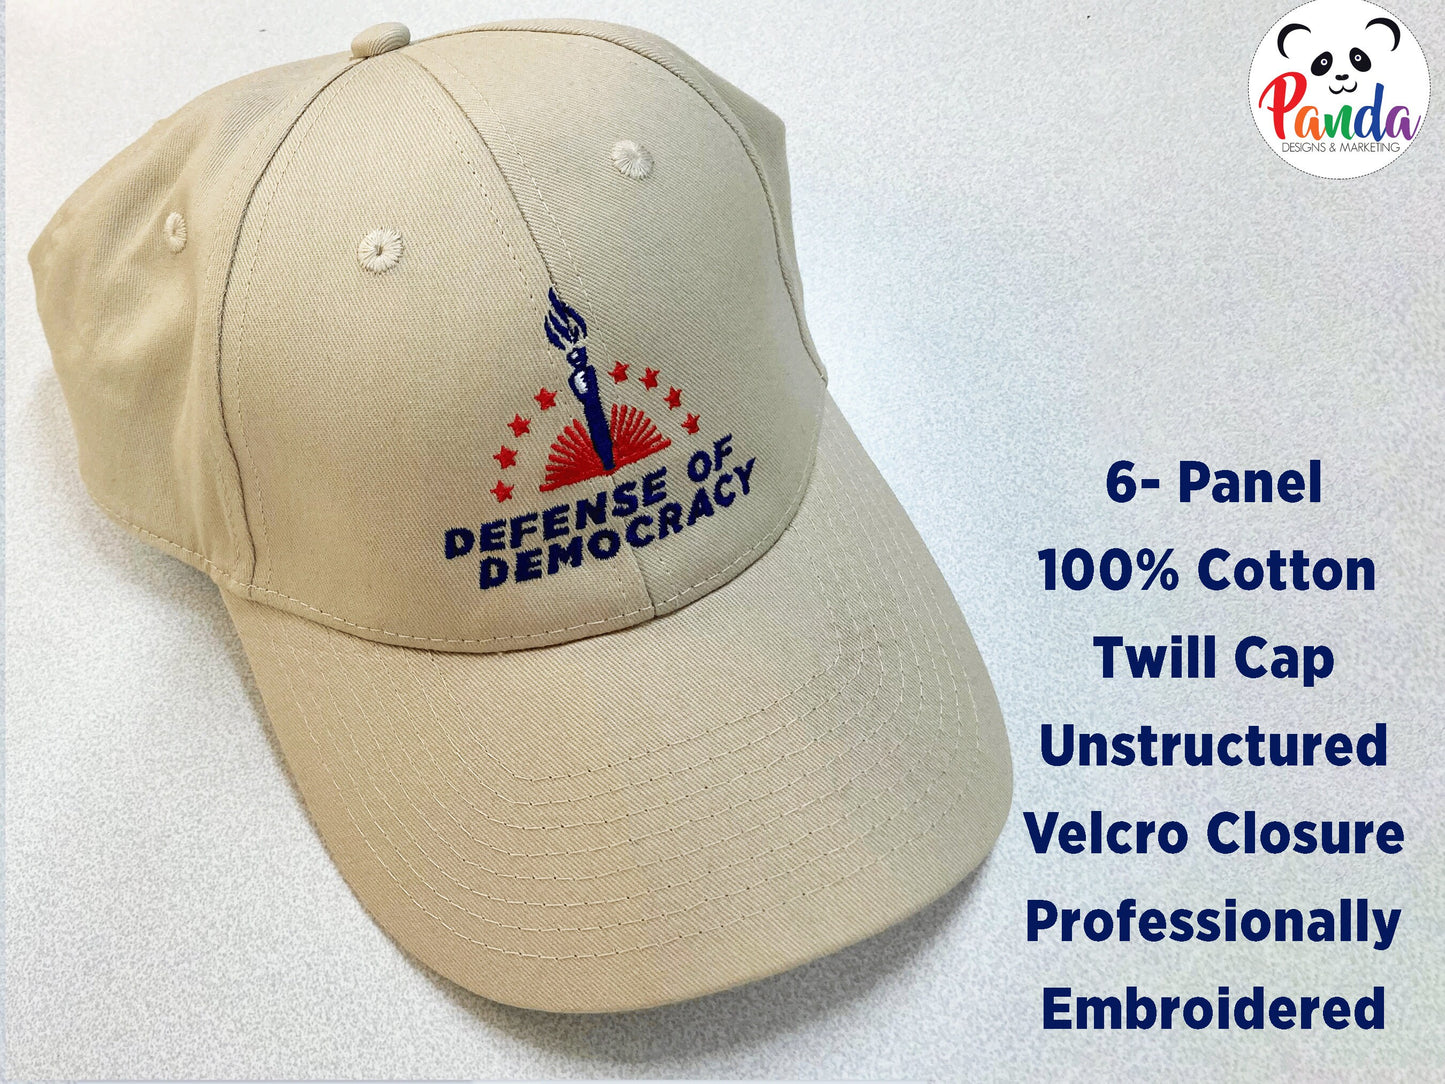 Embroidered Hat - Defense of Democracy Logo on Cotton Twill 6-panel unstructured baseball cap